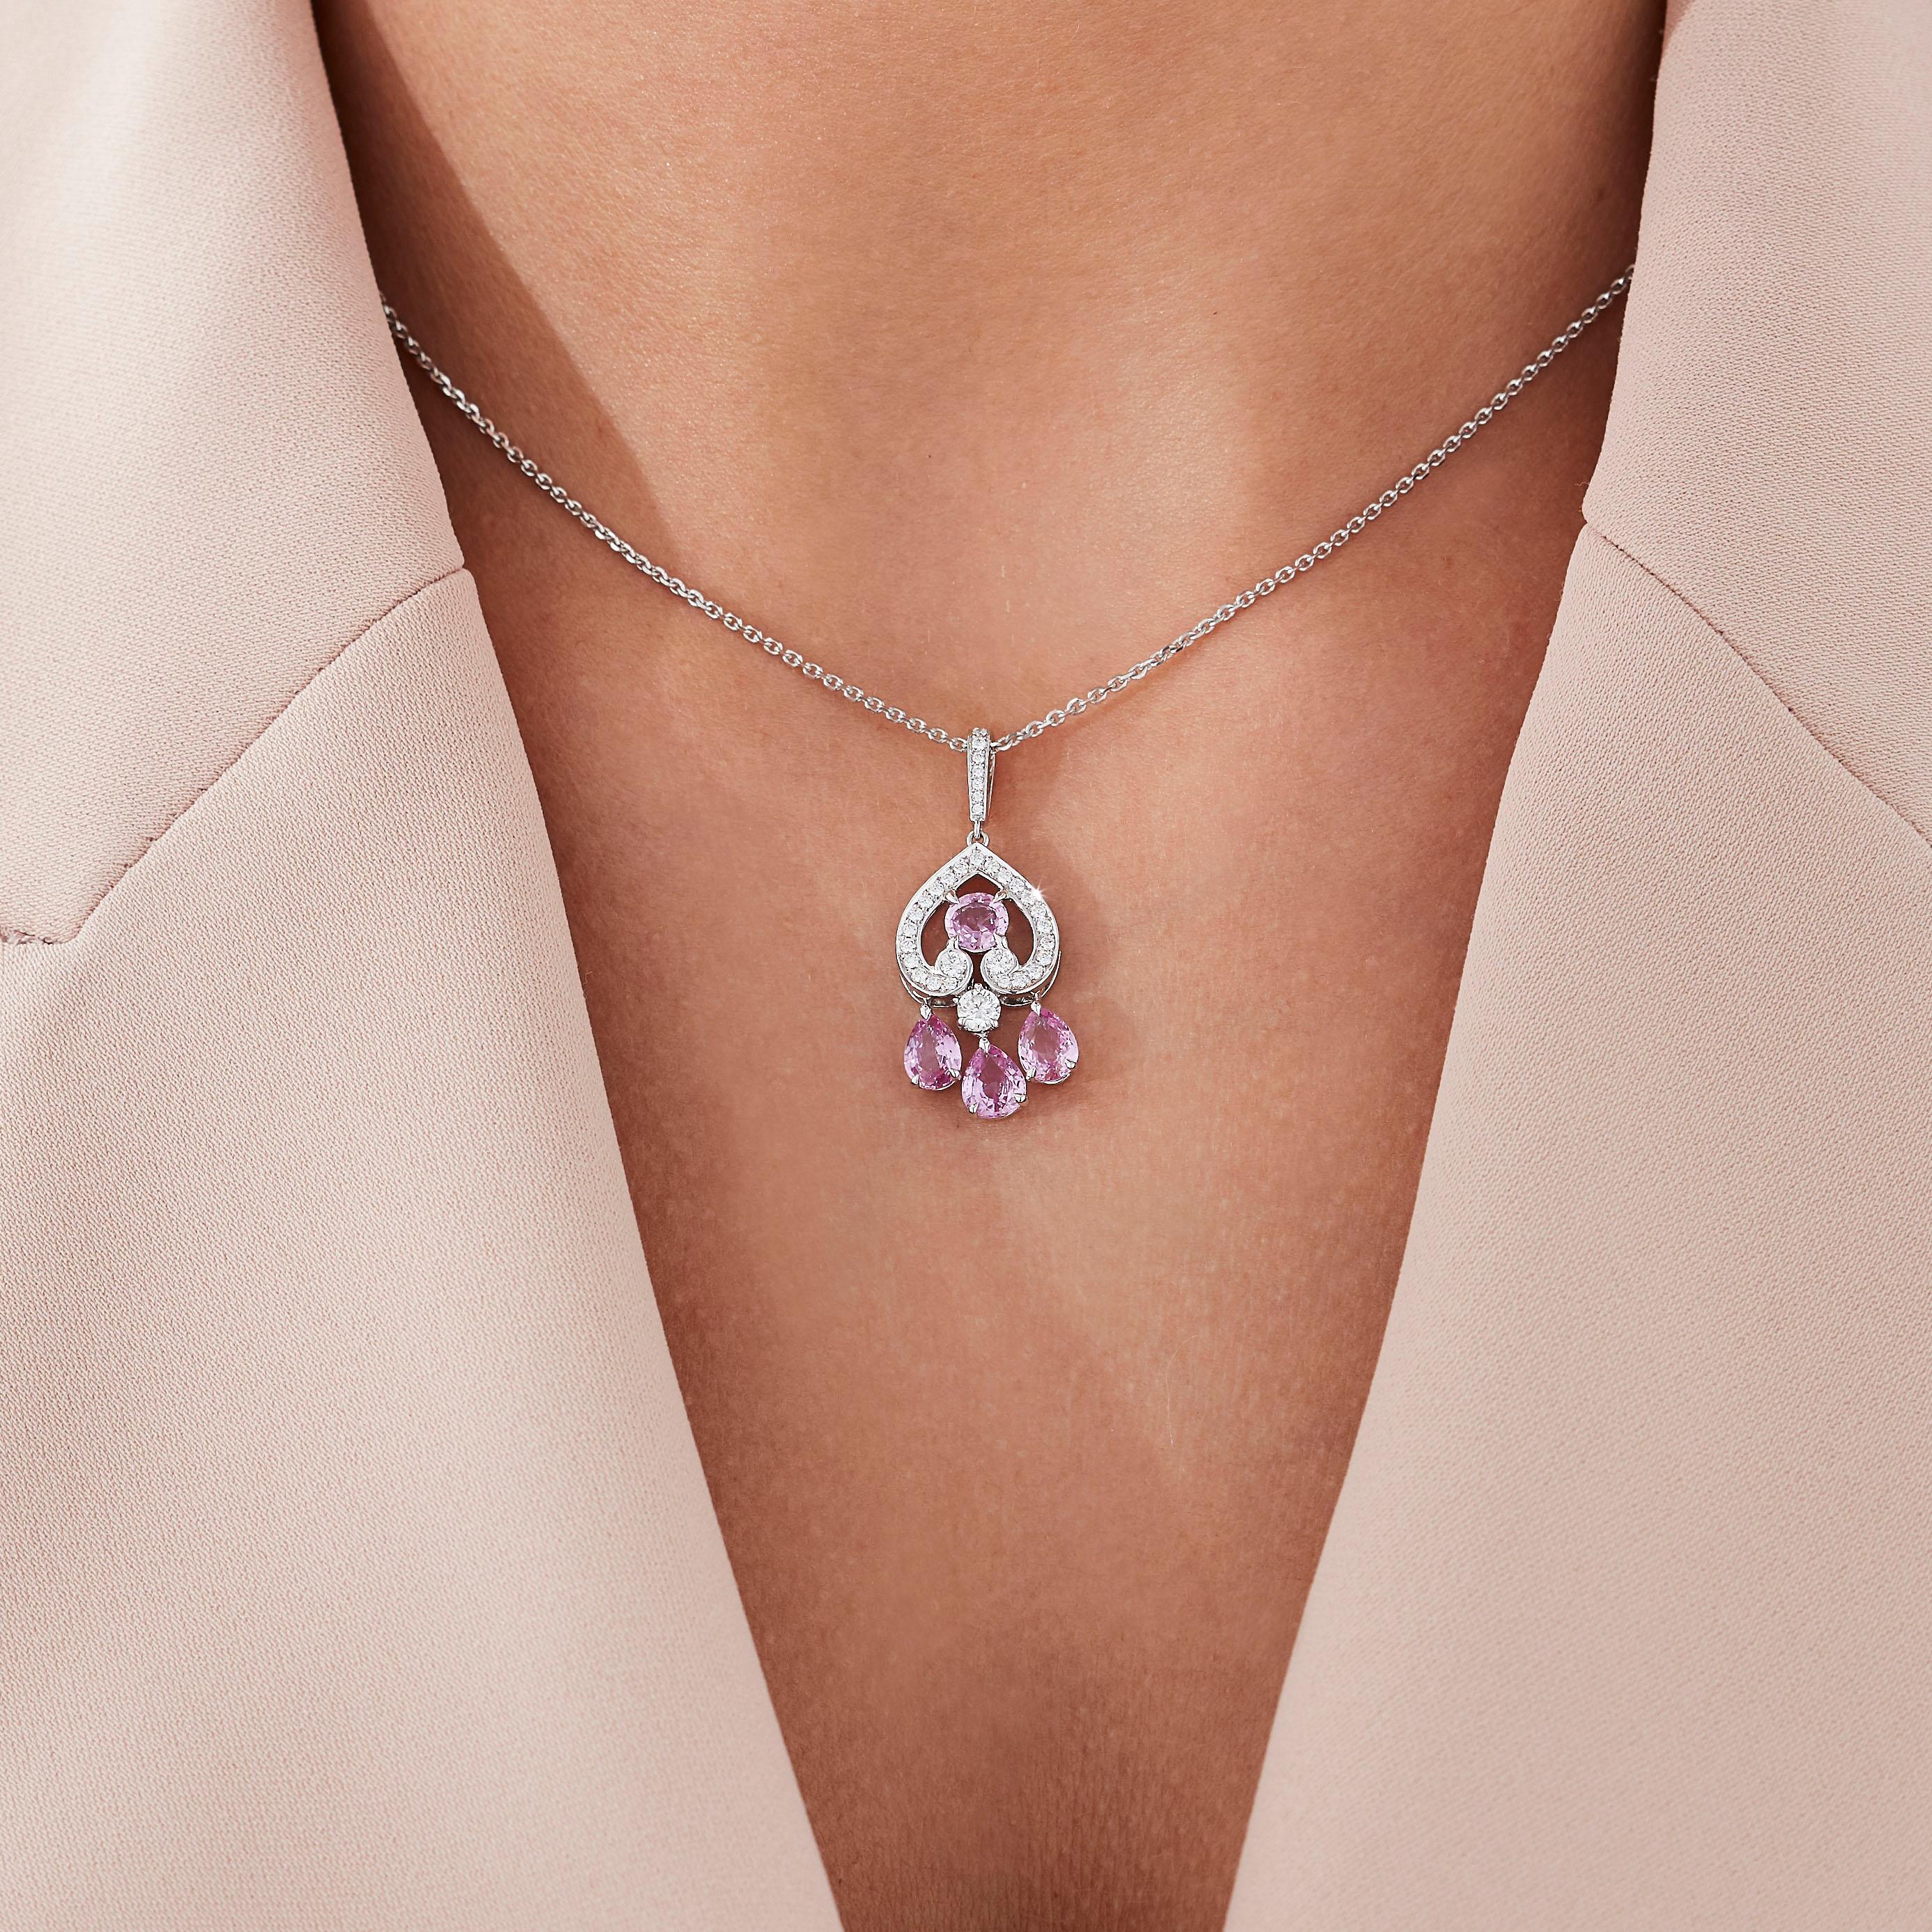 A House of Garrard 18 karat white gold pendant from the 'Regal Cascade' collection, set with round white diamonds and round and pearshape pink sapphires.

34 round white diamonds weighing: 0.44cts
4 pink sapphires weighing: 2.24cts

The House of